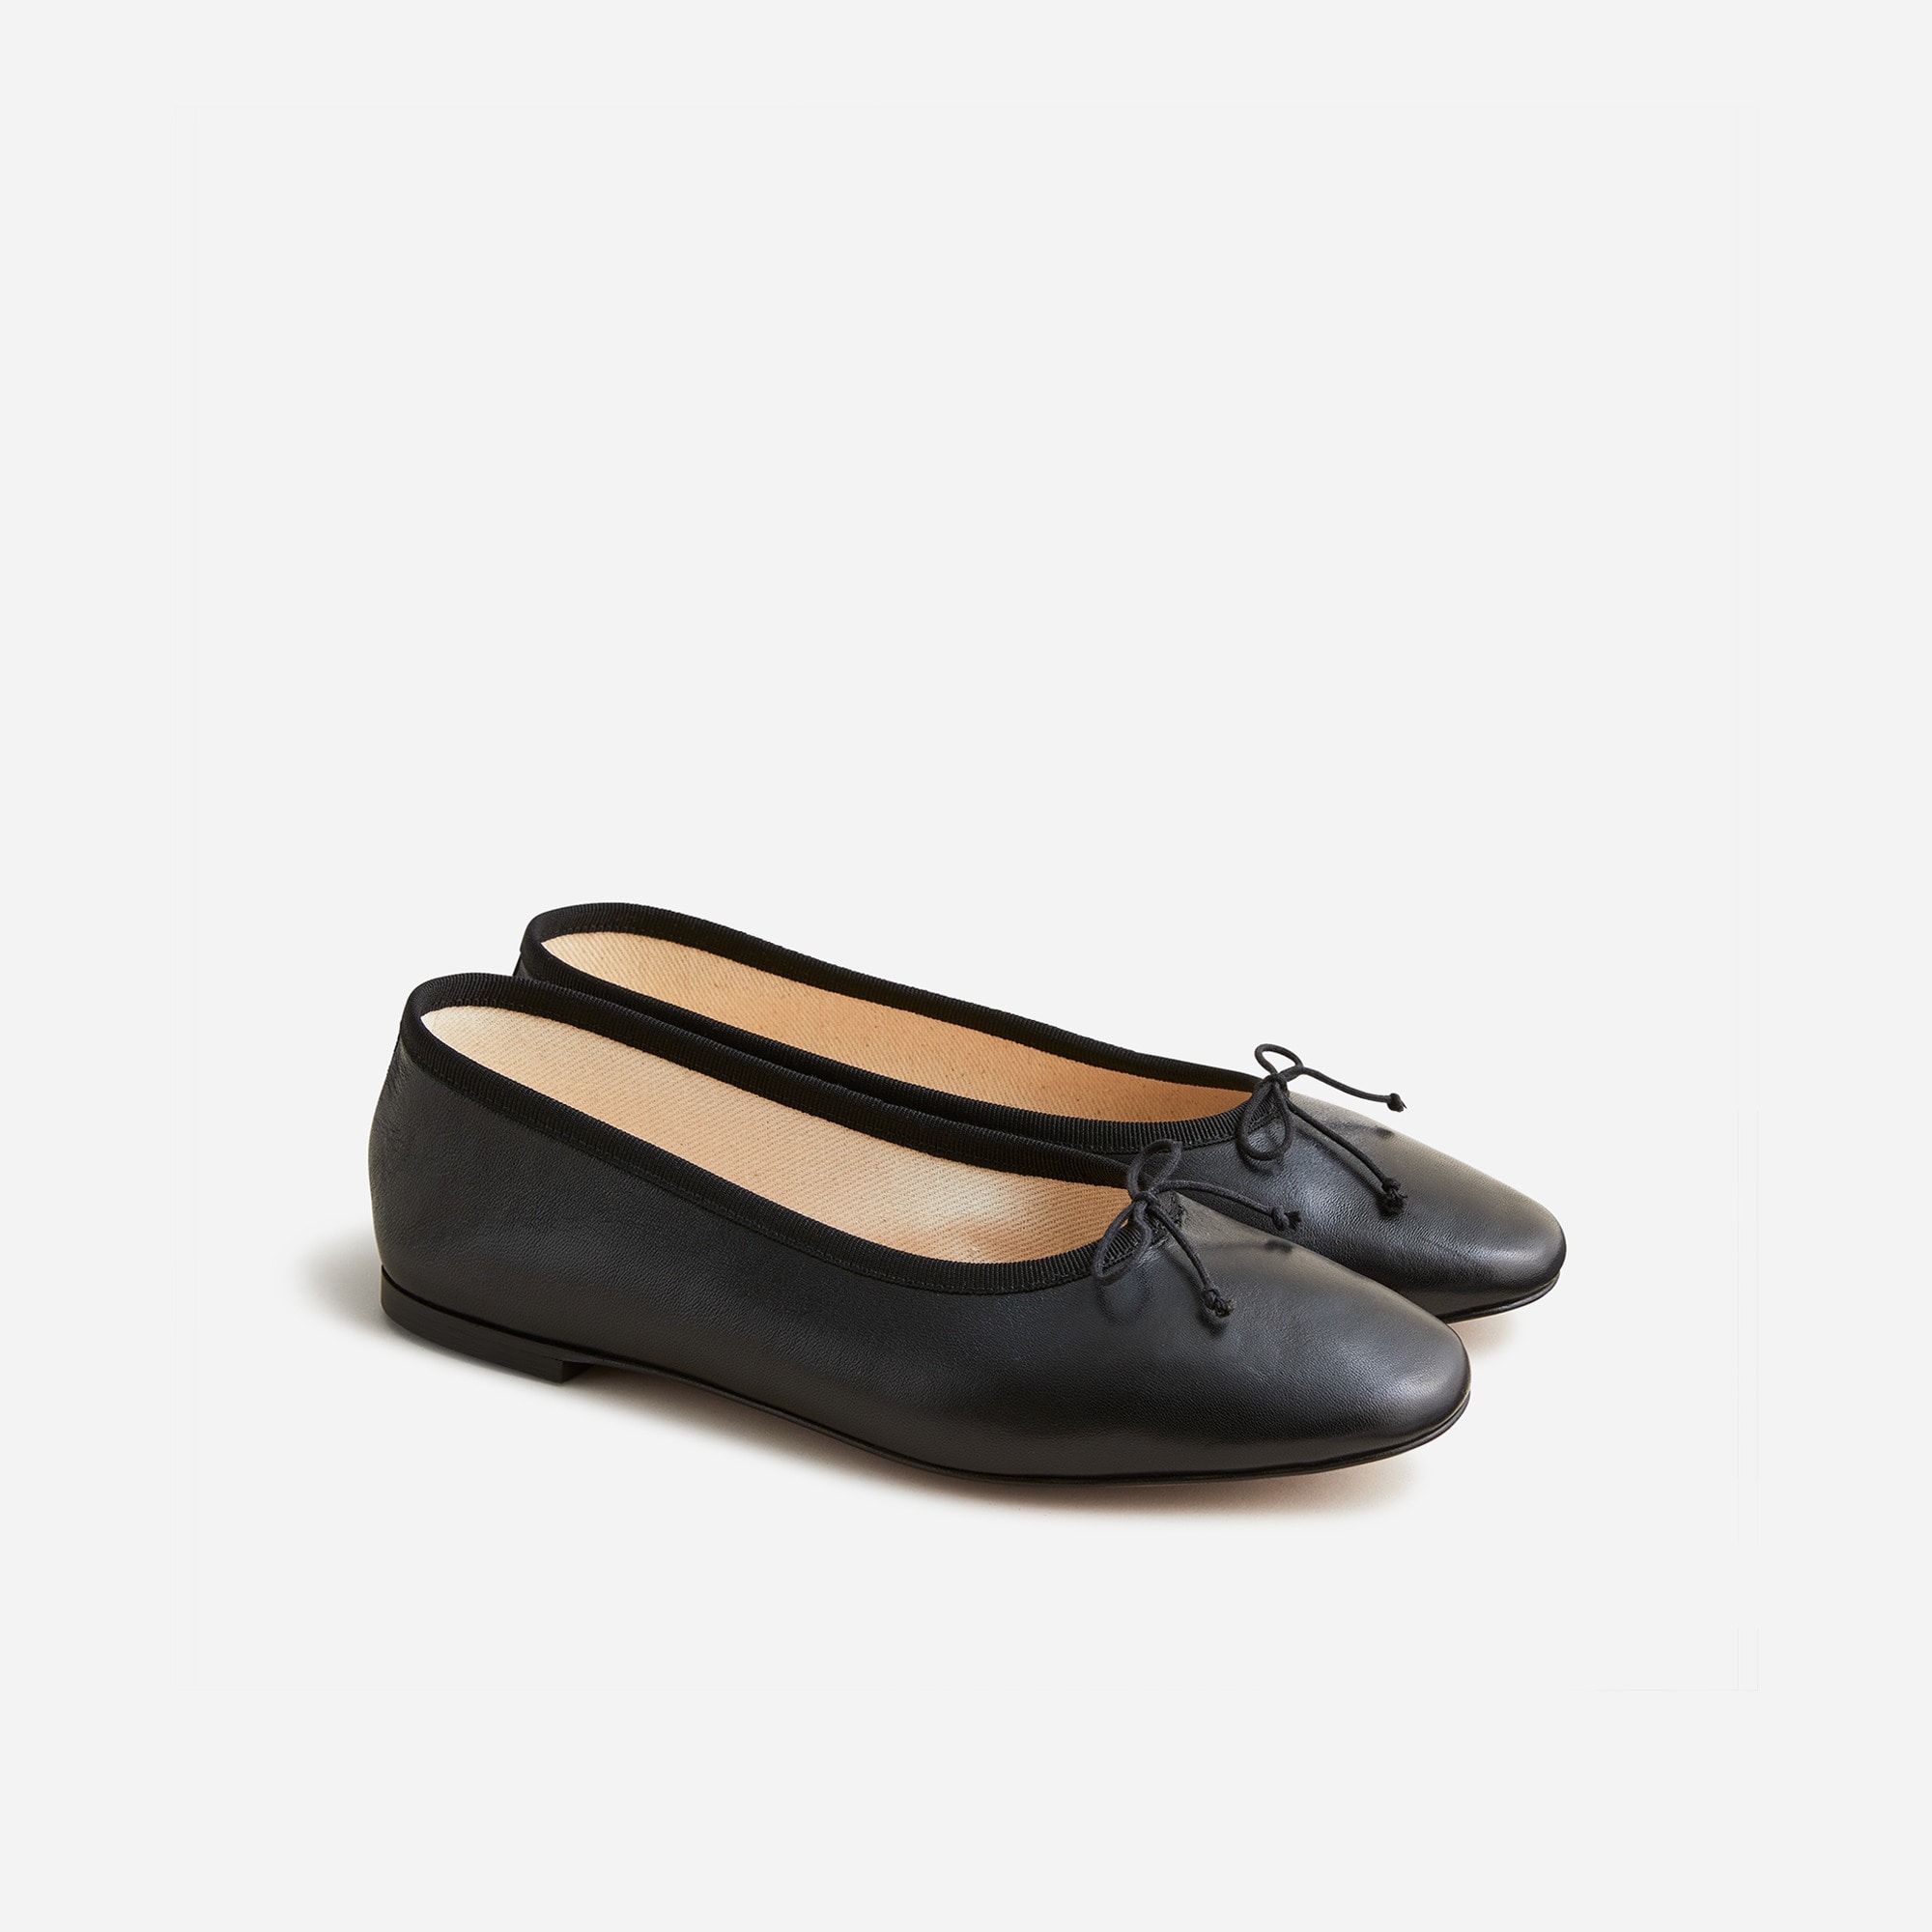  Zoe ballet flats in leather